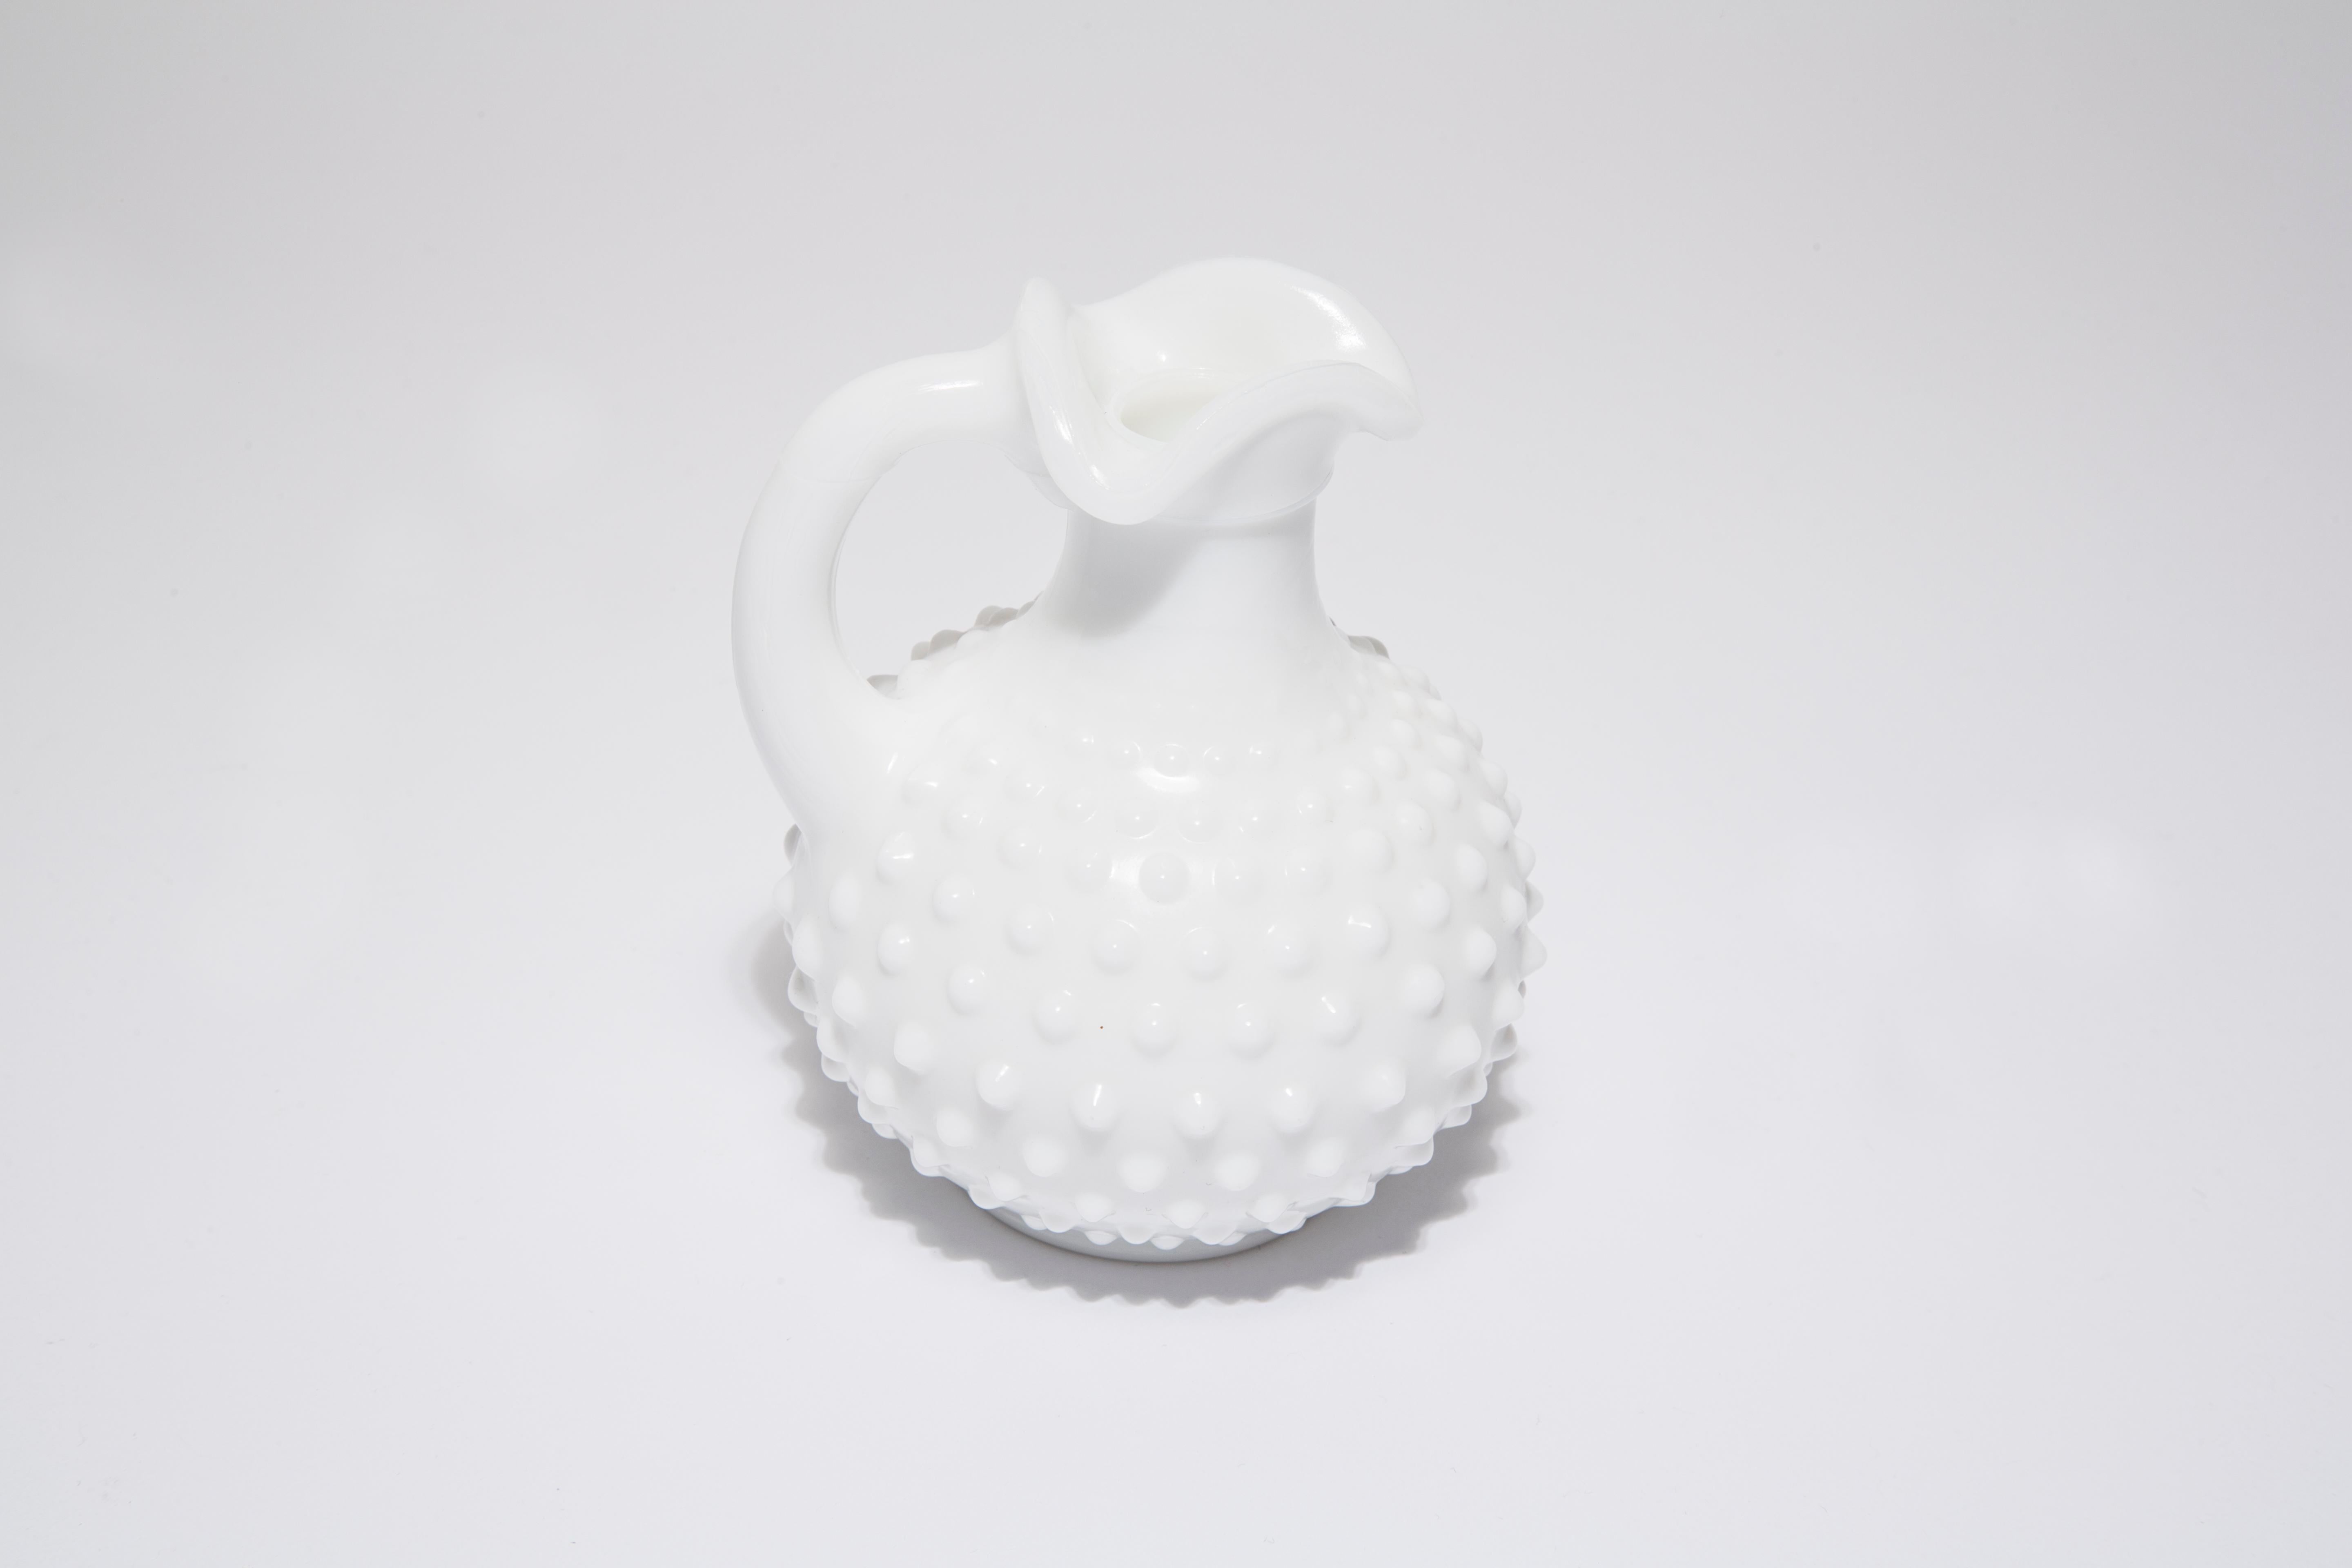 Ceramic Midcentury Porcelain White Mini Vase with a Frill, Europe, 1990s For Sale